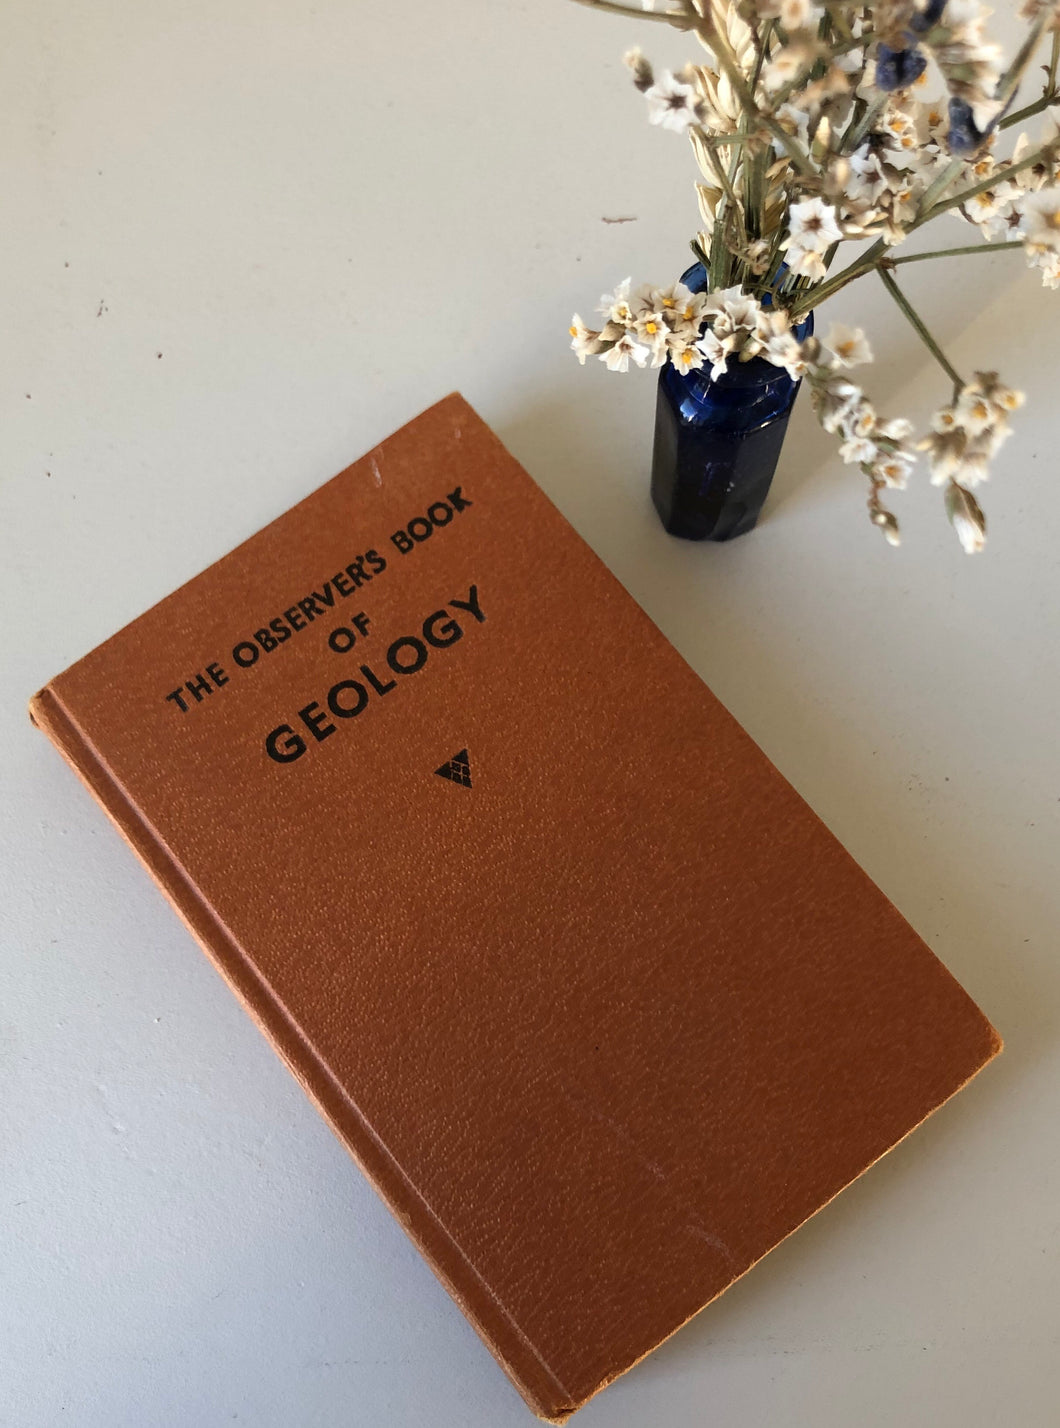 Observer Book of Geology